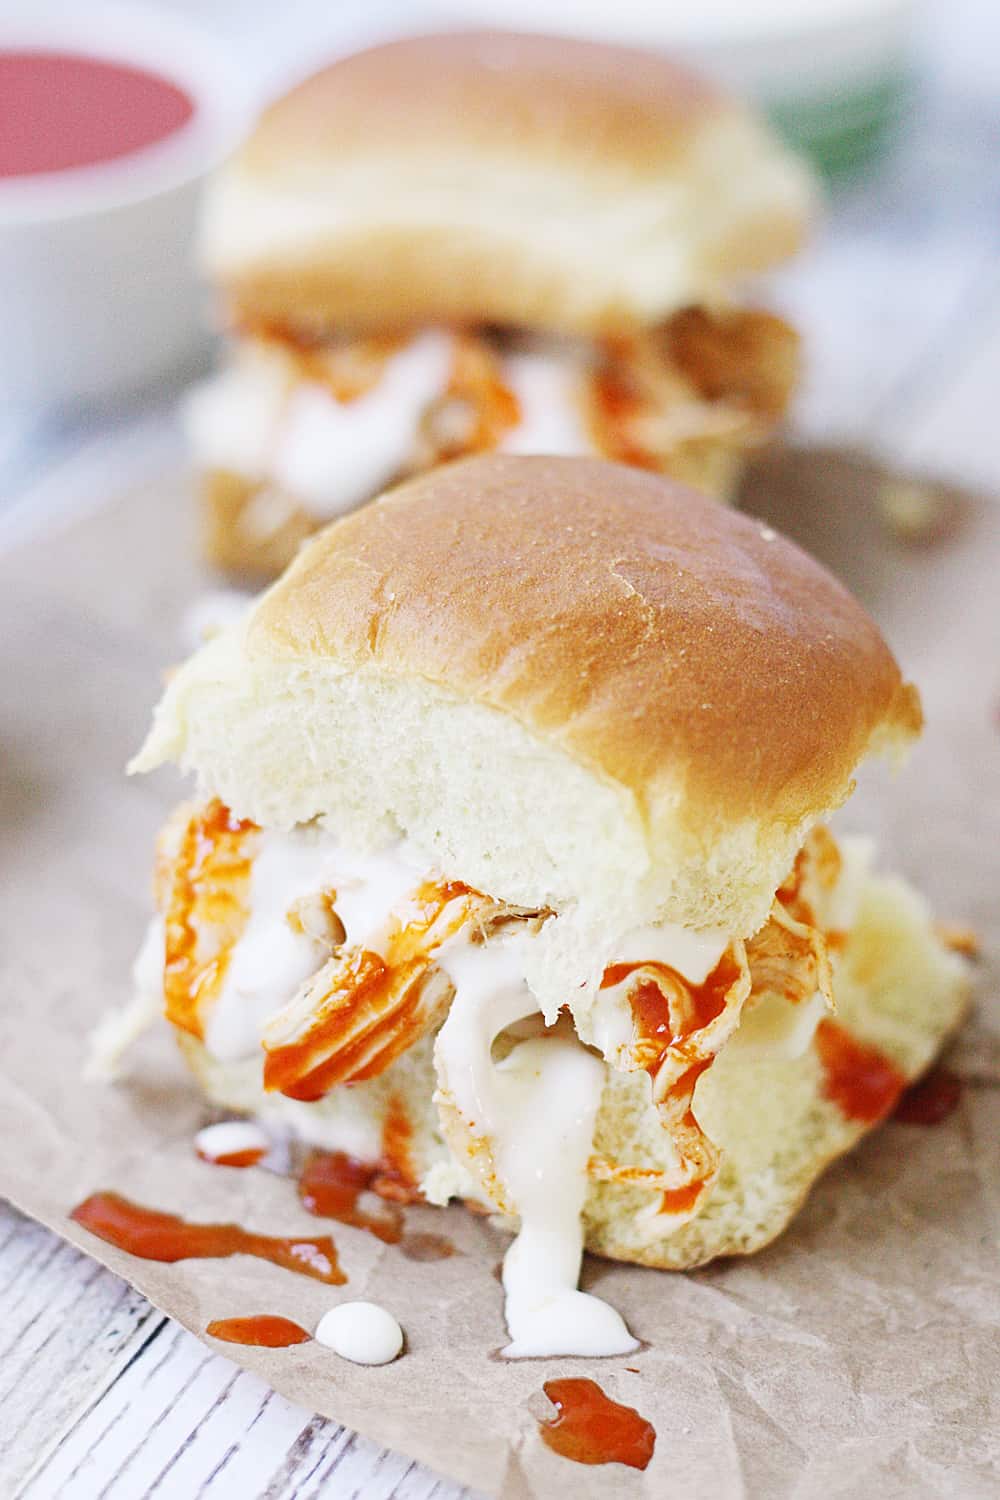 Slow Cooker Buffalo Ranch Chicken -- This slow cooker buffalo ranch chicken makes THE BEST sliders. Top with creamy blue cheese dressing and pepper jack cheese for the perfect party sandwich! #halfscratched #buffalochicken #sliders #sandwich #buffaloranch #slowcooker #crockpot #recipe #appetizer #chickensliders #chickensandwich #cooking #easyrecipe